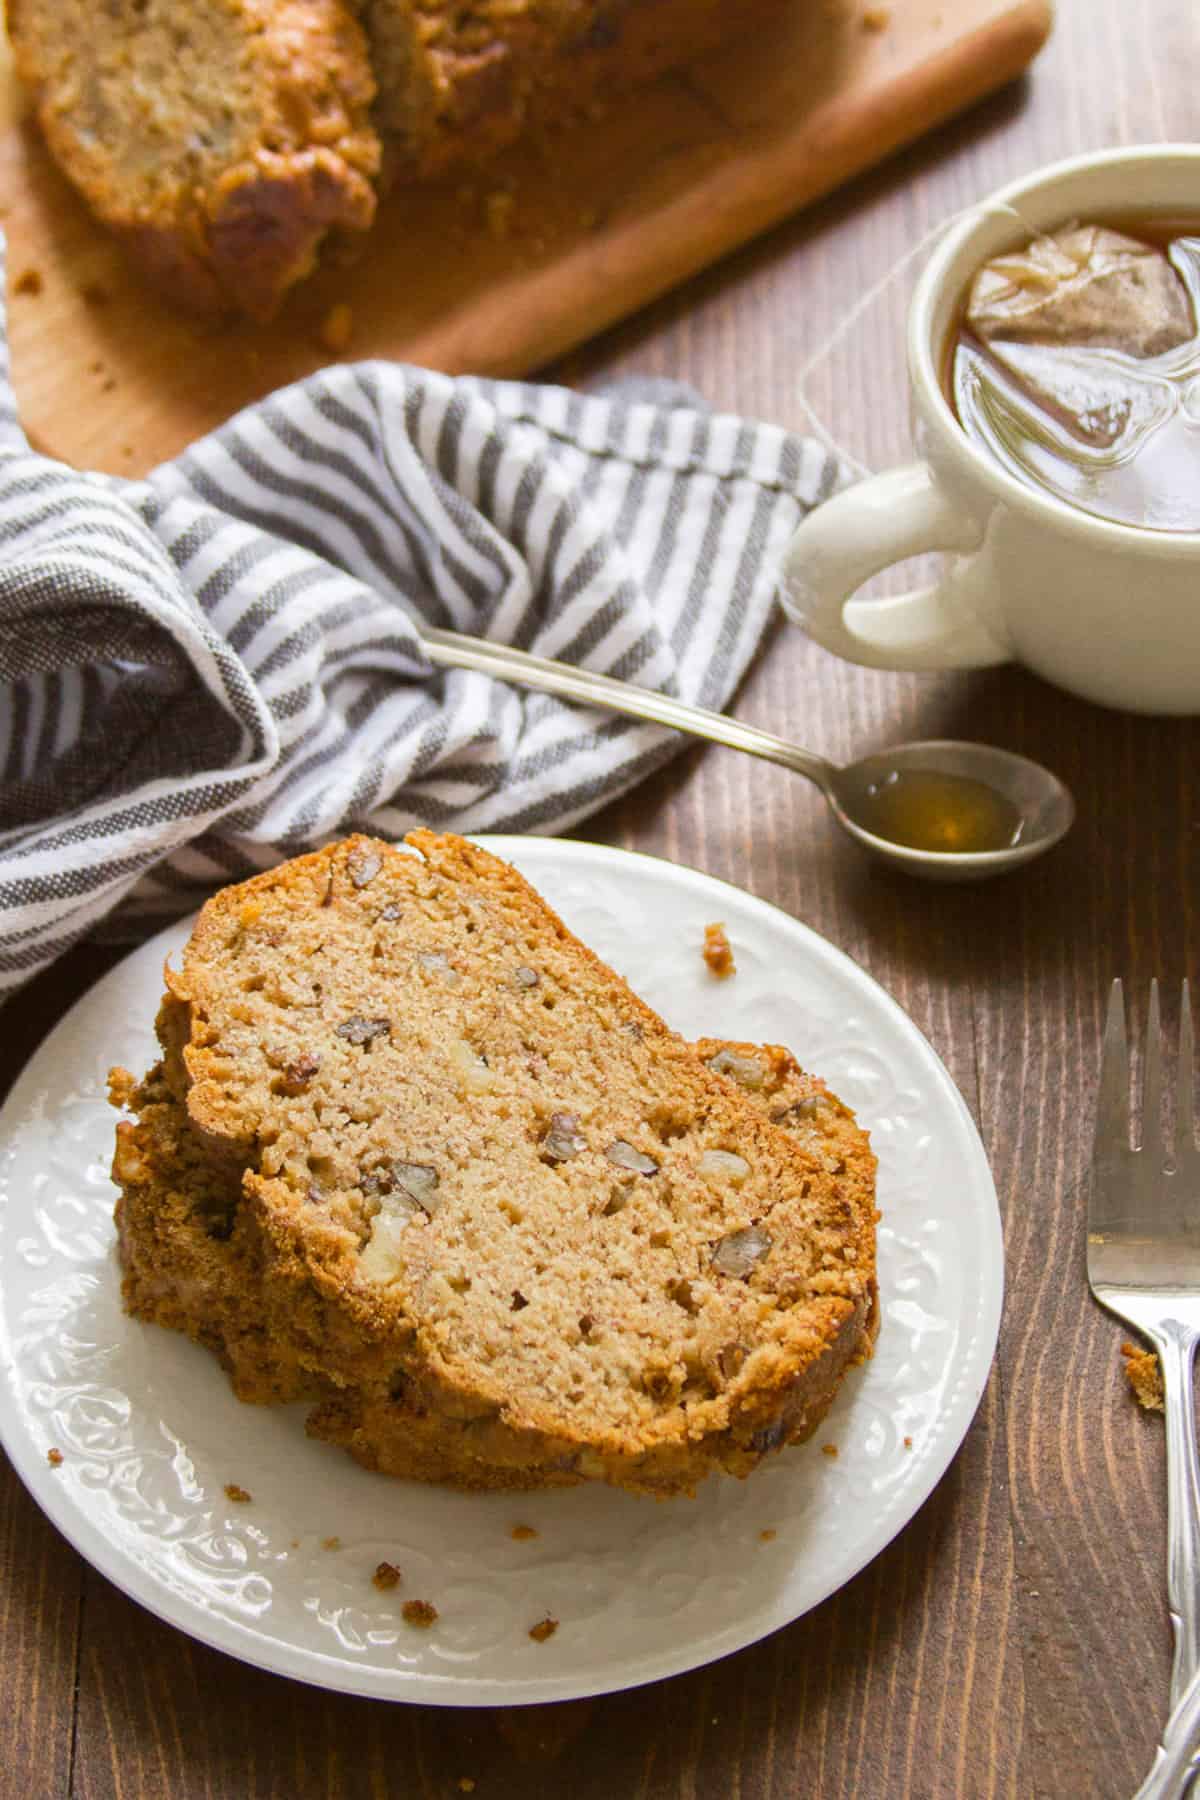 Two slices of Vegan Banana Bread on a plate with tea cup and napkin in the background.